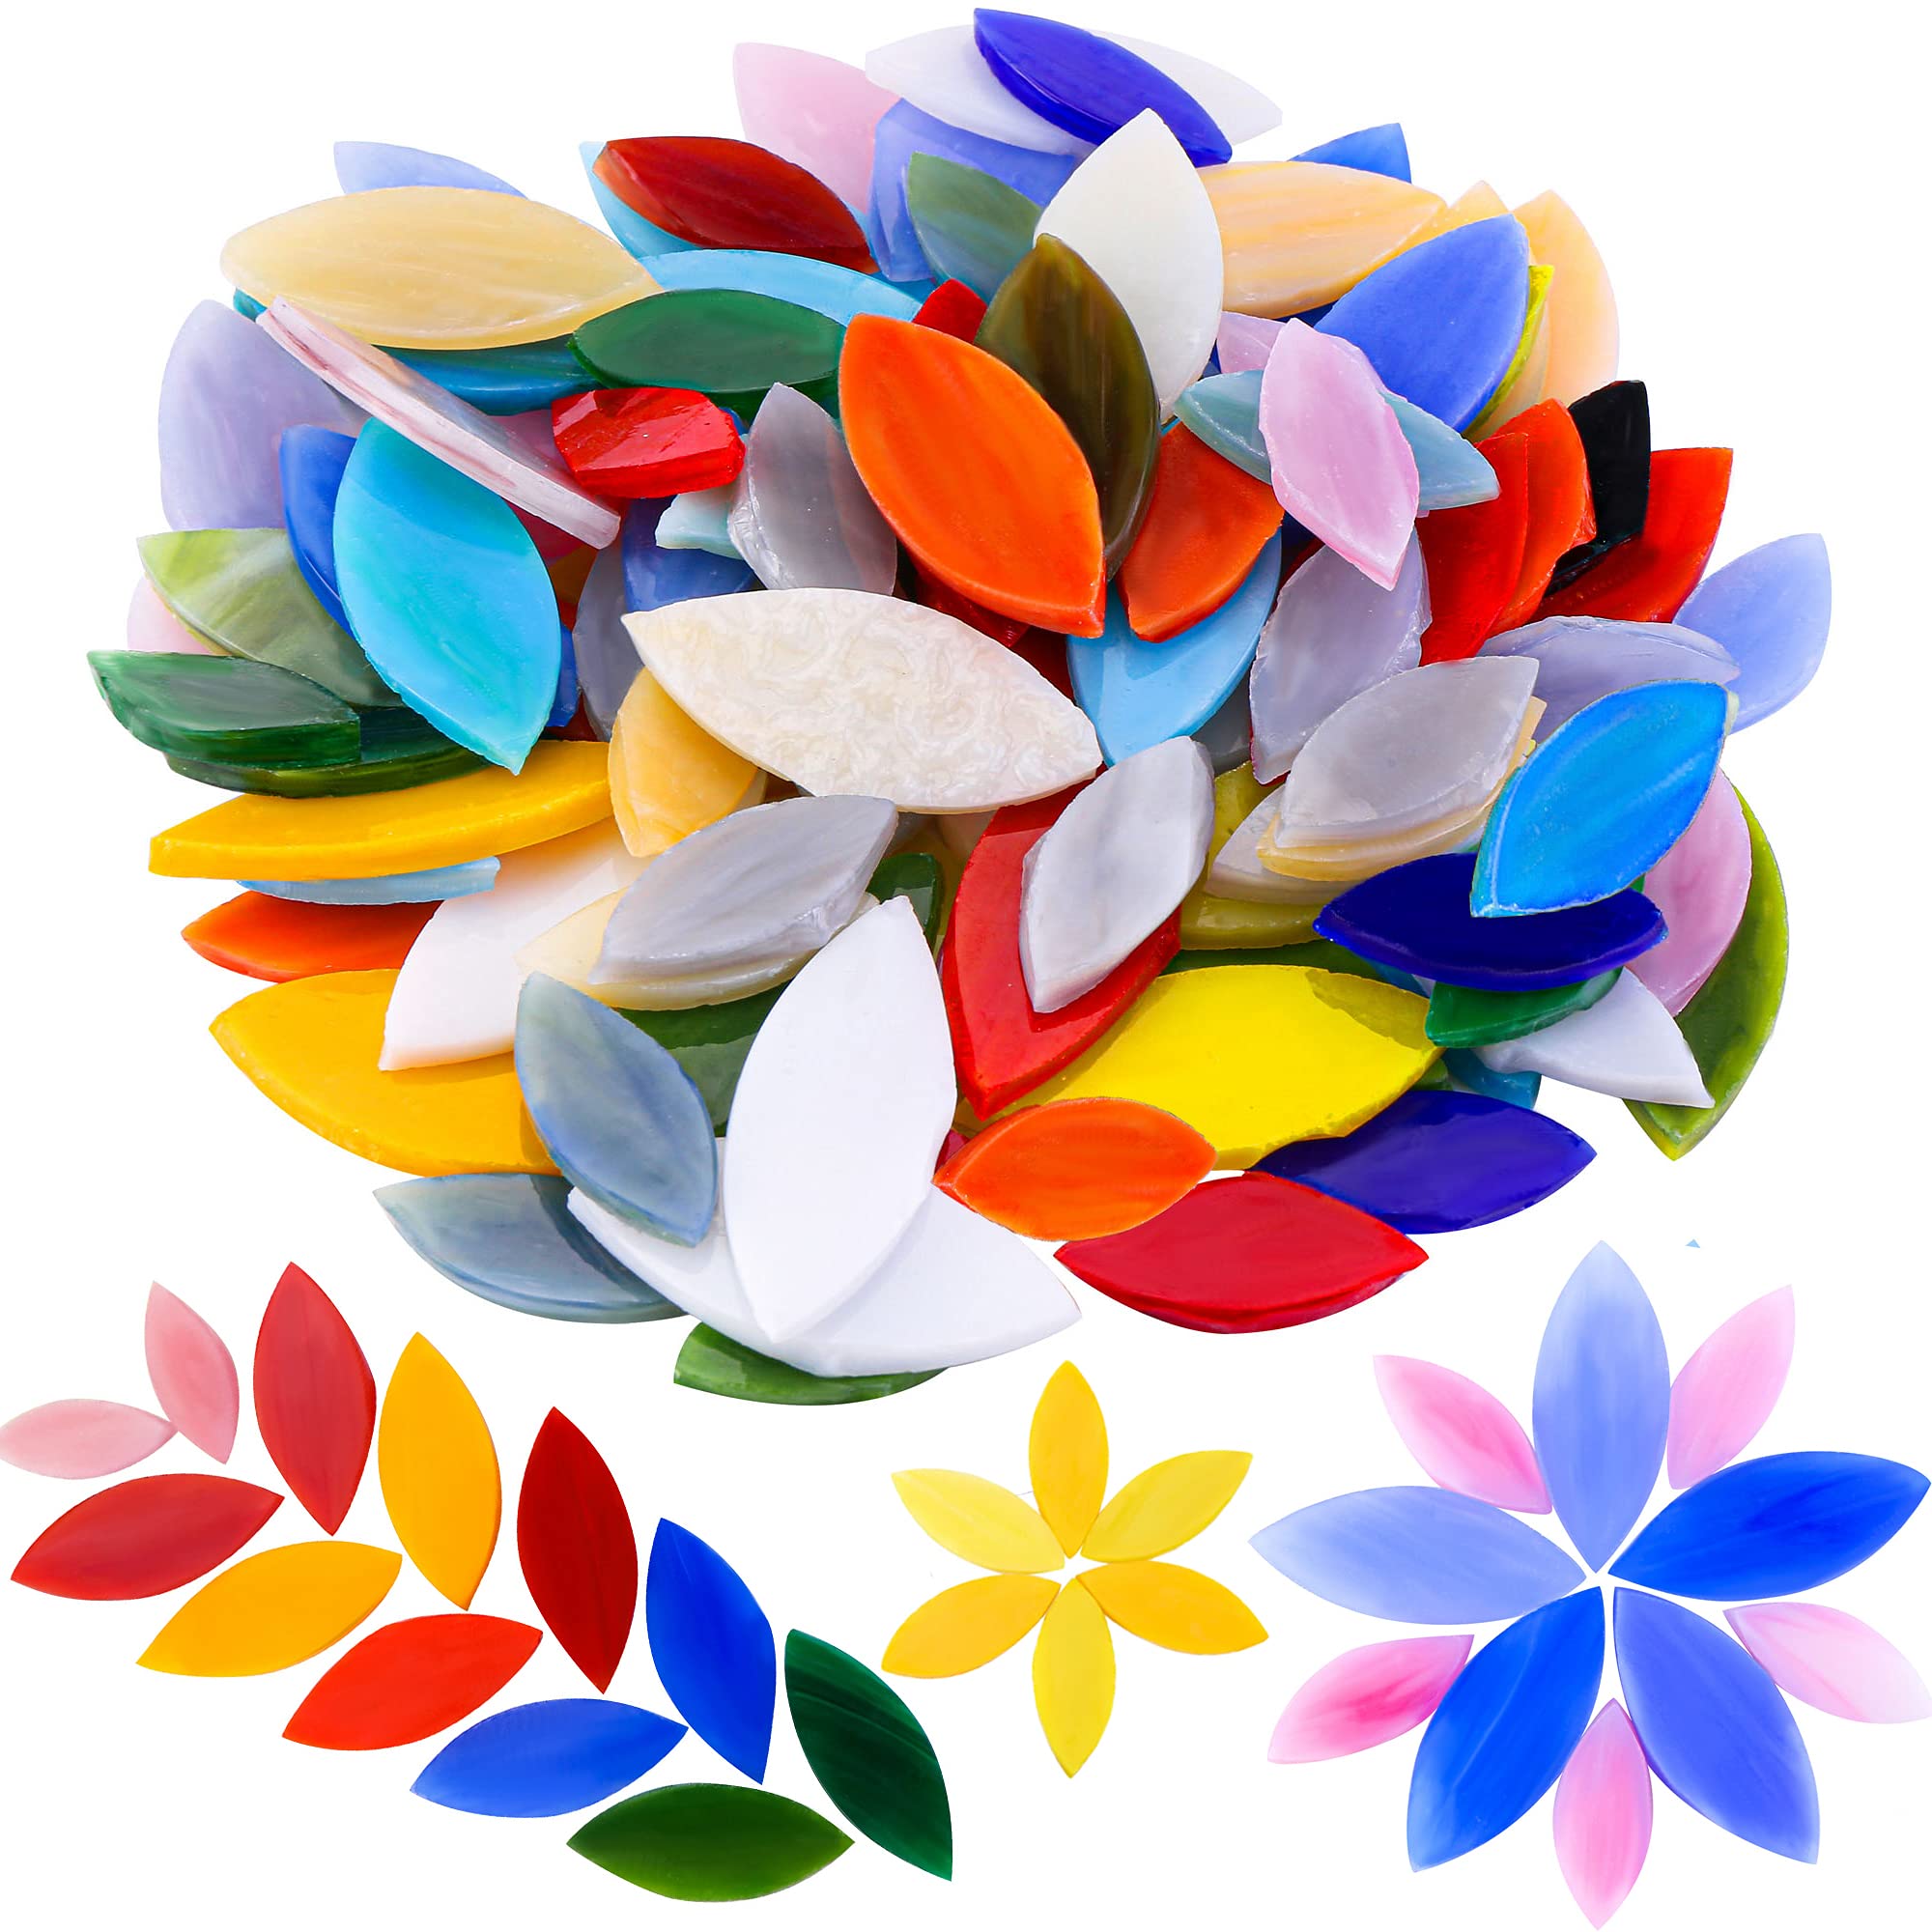 Mornajina 100 Pieces Petal Mosaic Tiles Mixed Color Mosaic Glass Pieces  Hand-Cut Stained Glass Flower Leaves Tiles for Crafts Colorful Stained  Glass Pieces Mosaic Projects 100pcs